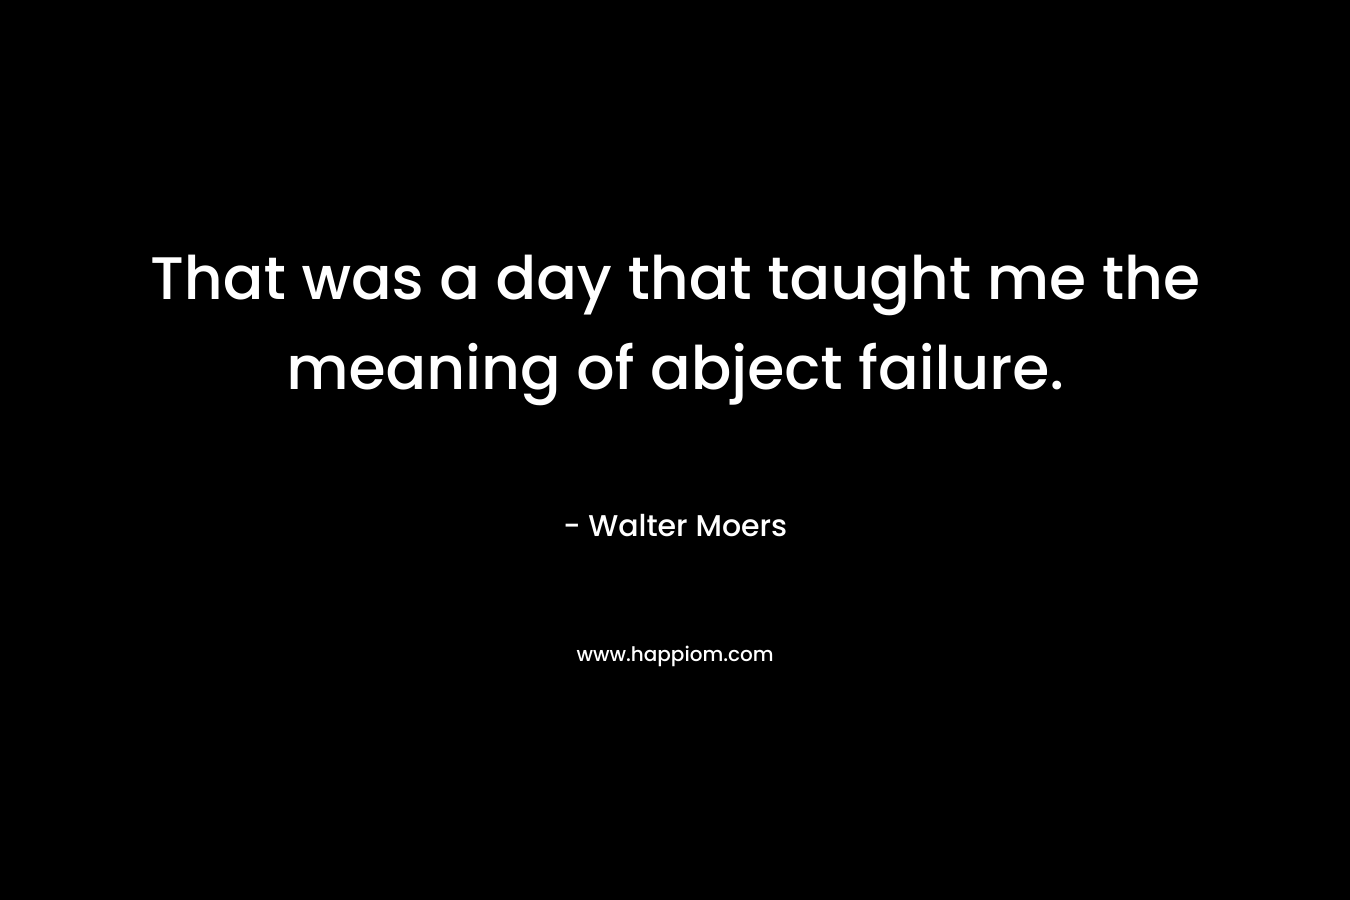 That was a day that taught me the meaning of abject failure. – Walter Moers